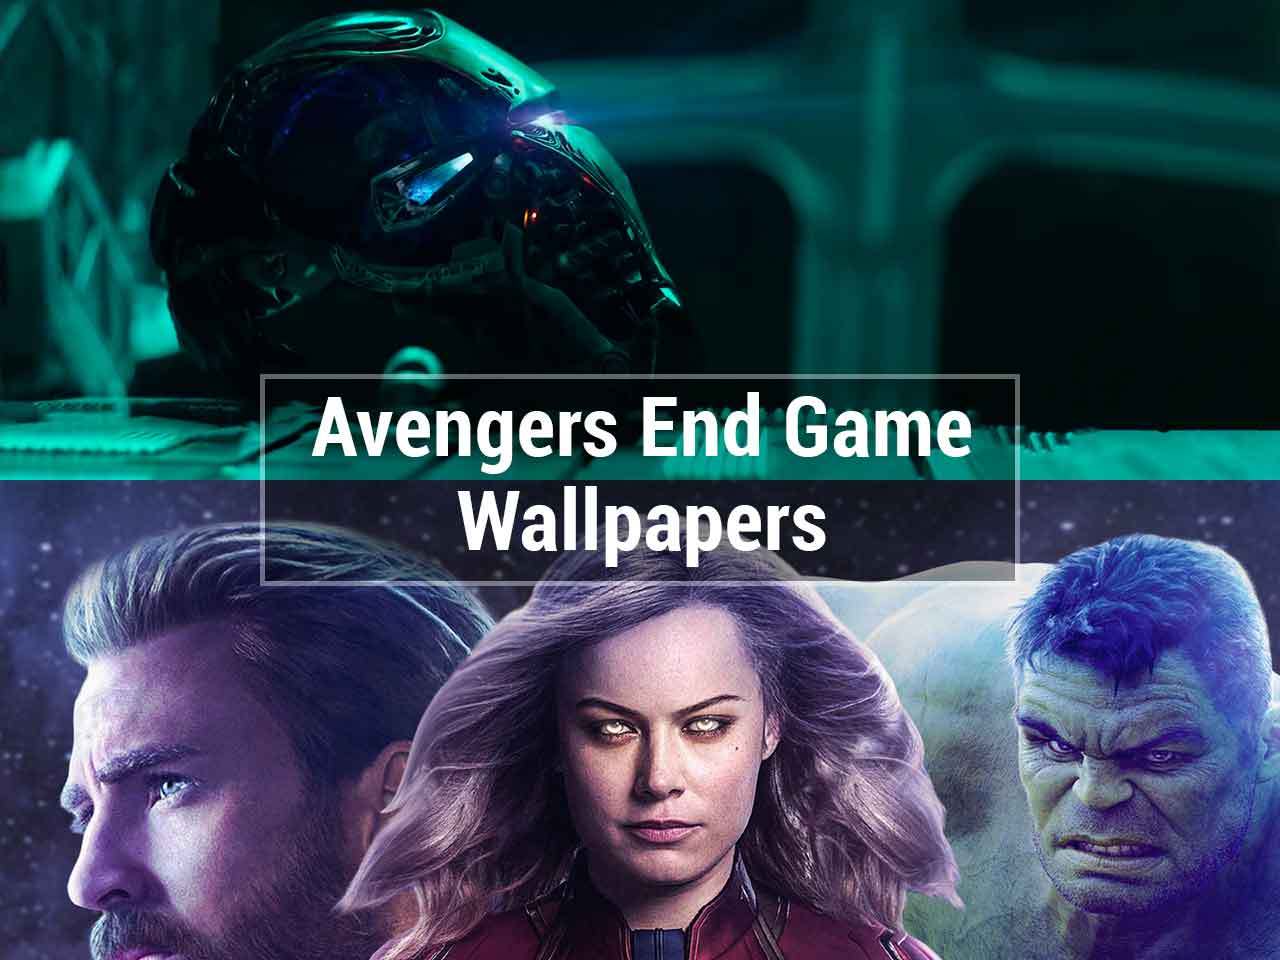 Download Avengers End Game Wallpaper; 12 High Quality Image